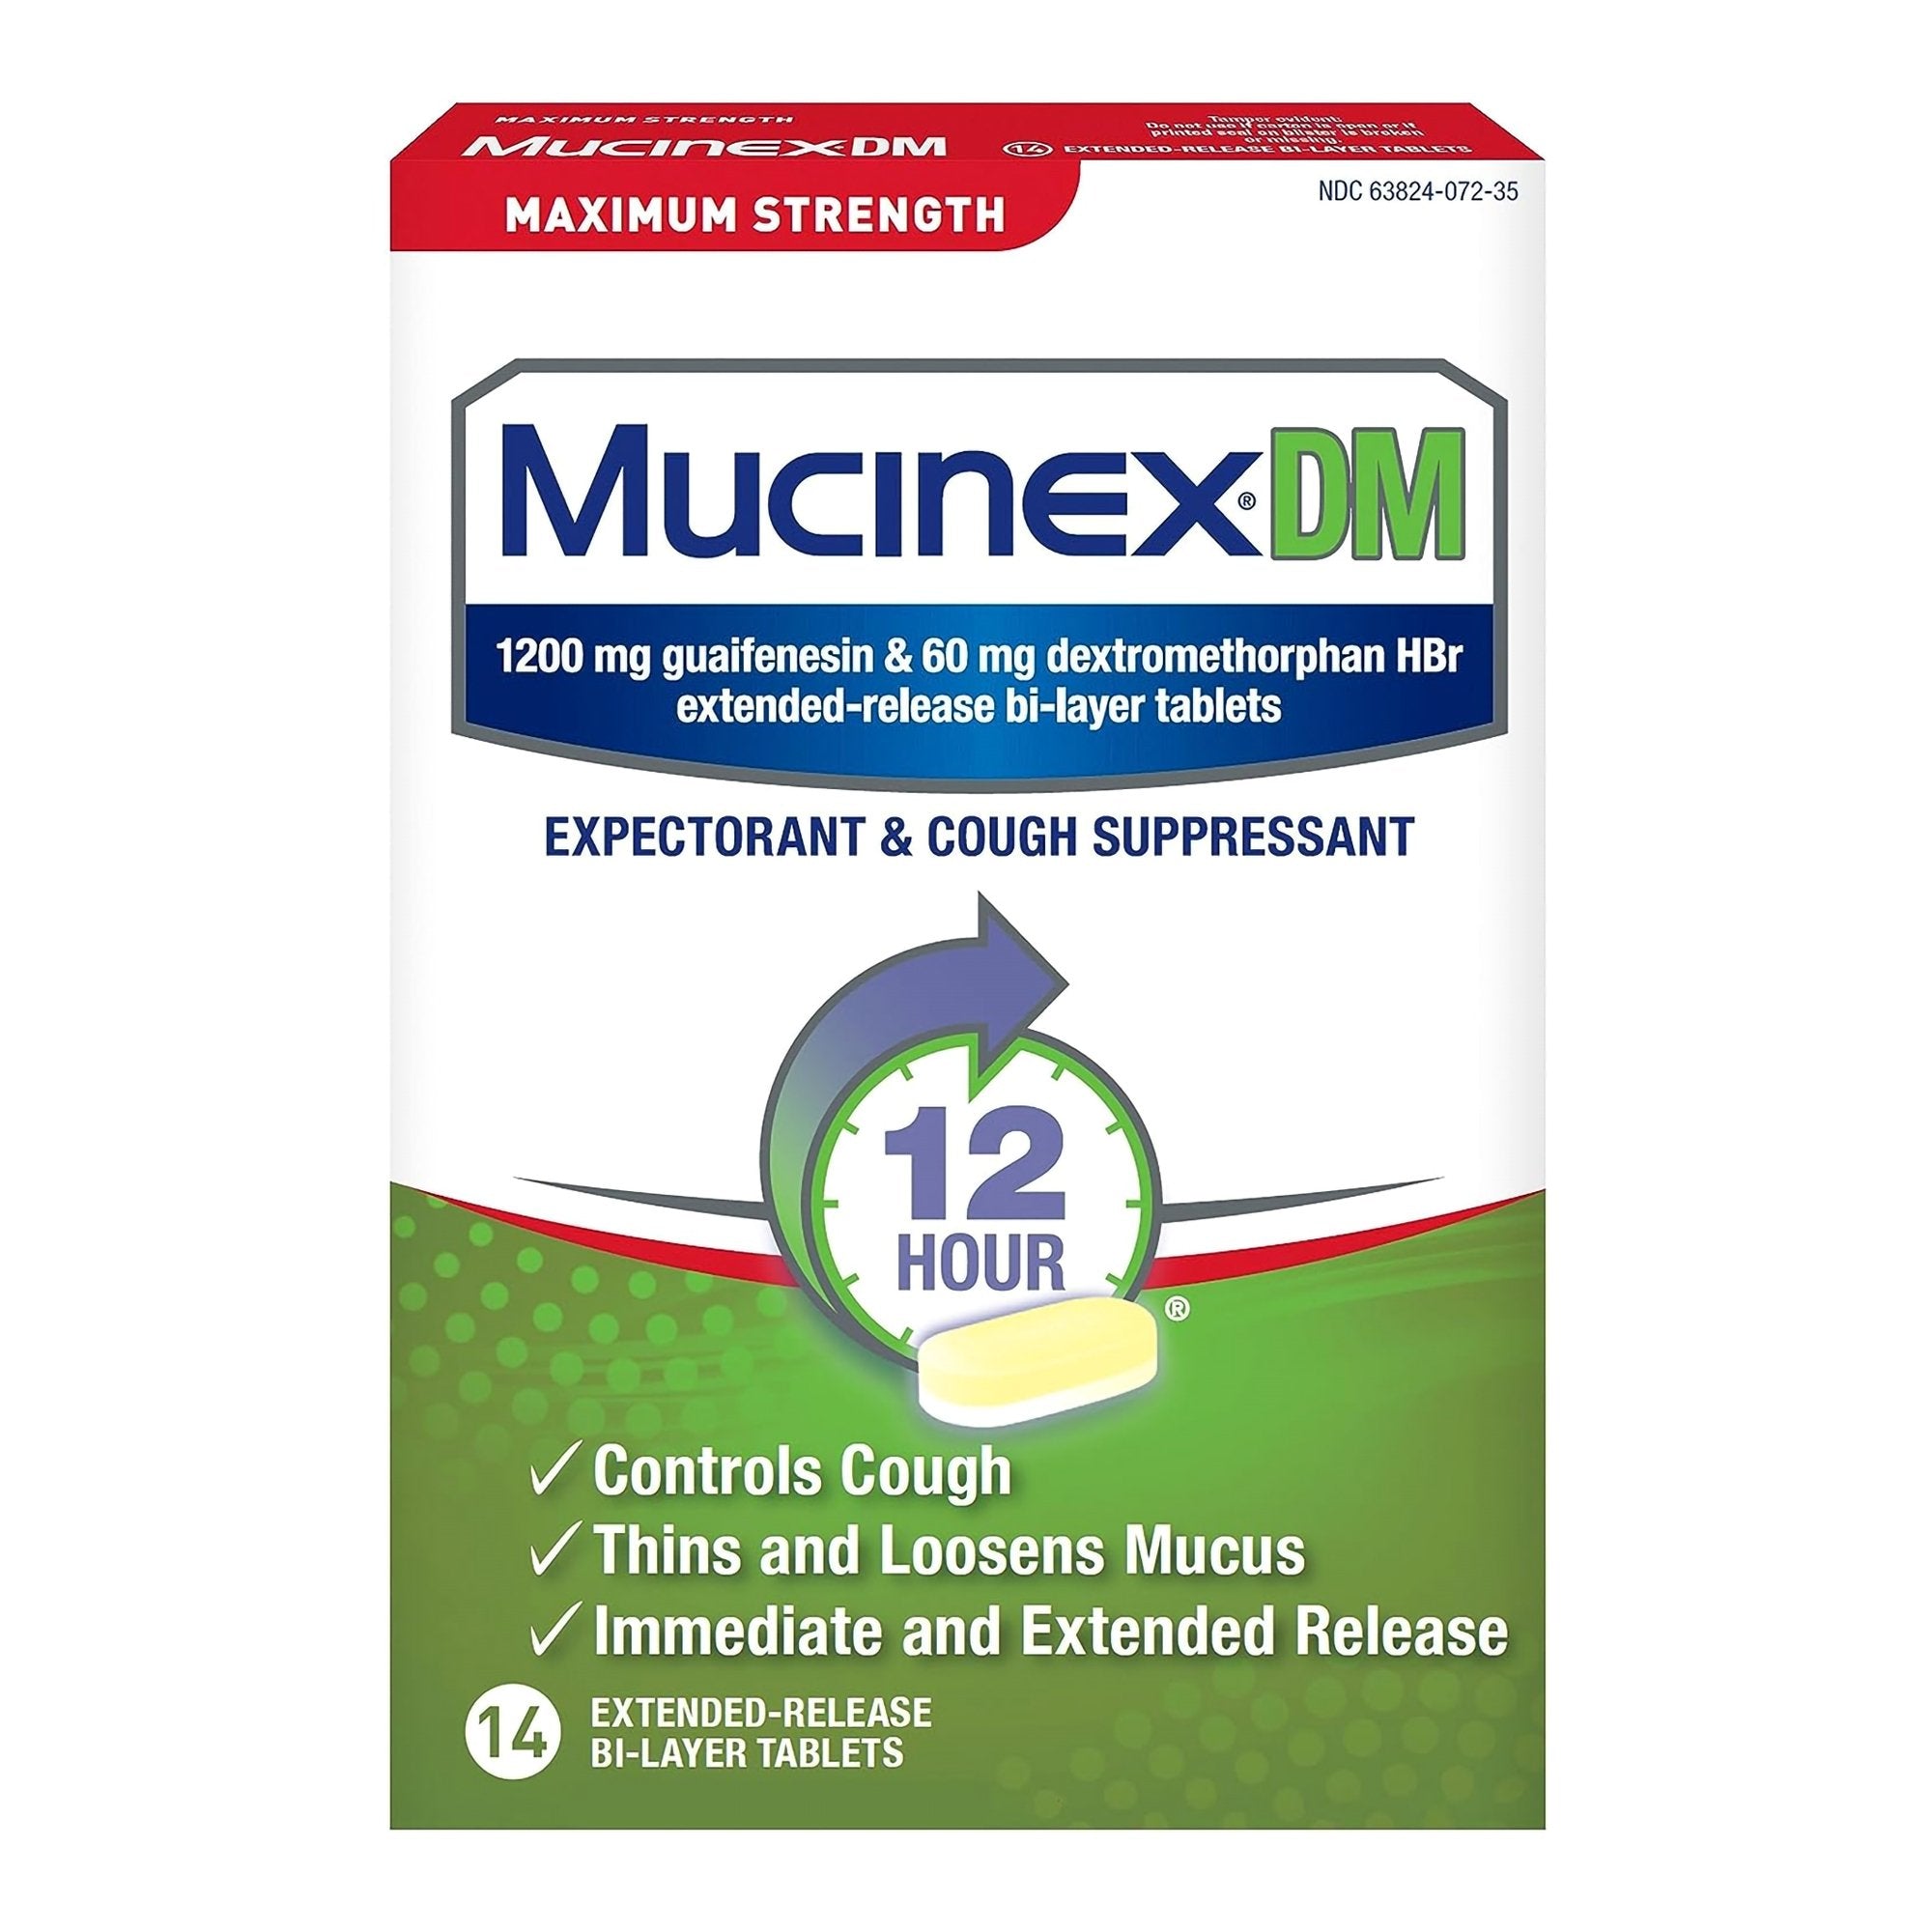 Cold and Cough Relief Mucinex® DM 1,200 mg - 60 mg Strength Tablet 14 per Box